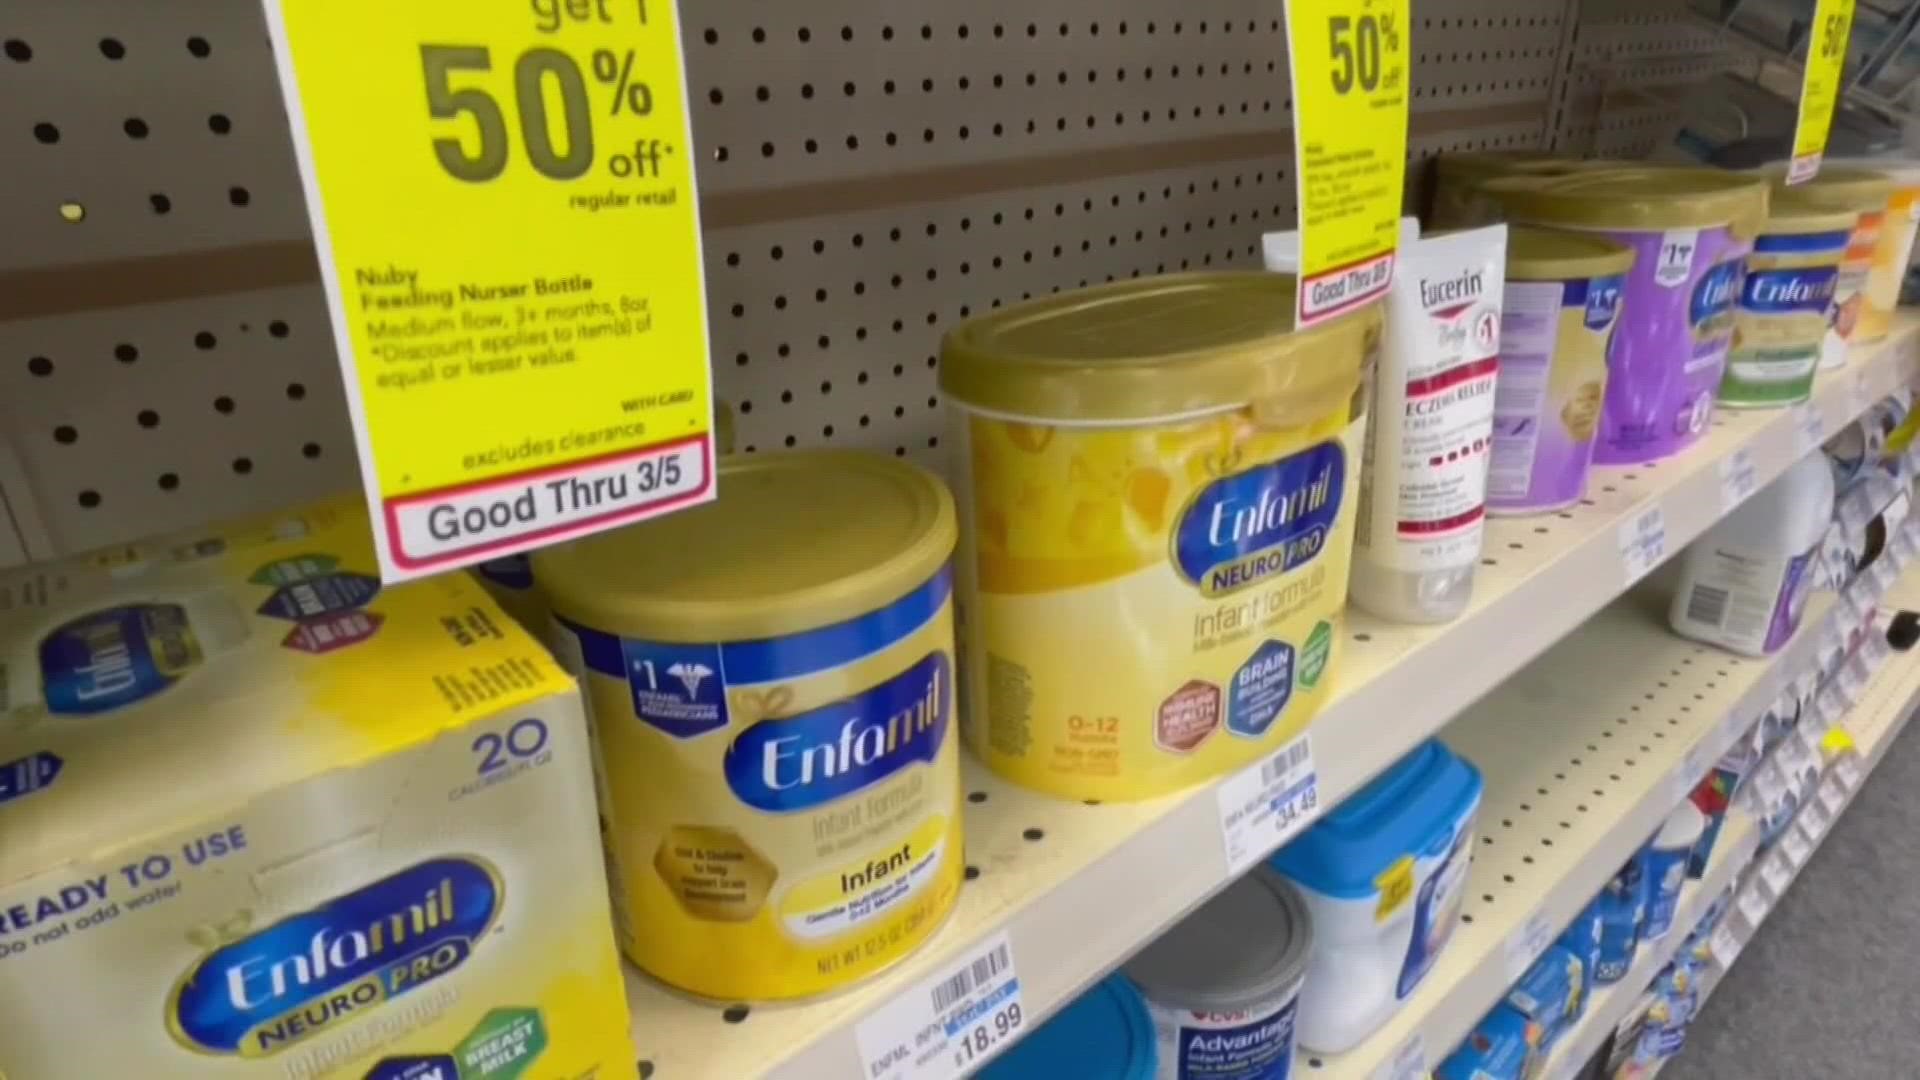 Family doctors in Maine have said they are seeing the shortage of formula affect their patients.